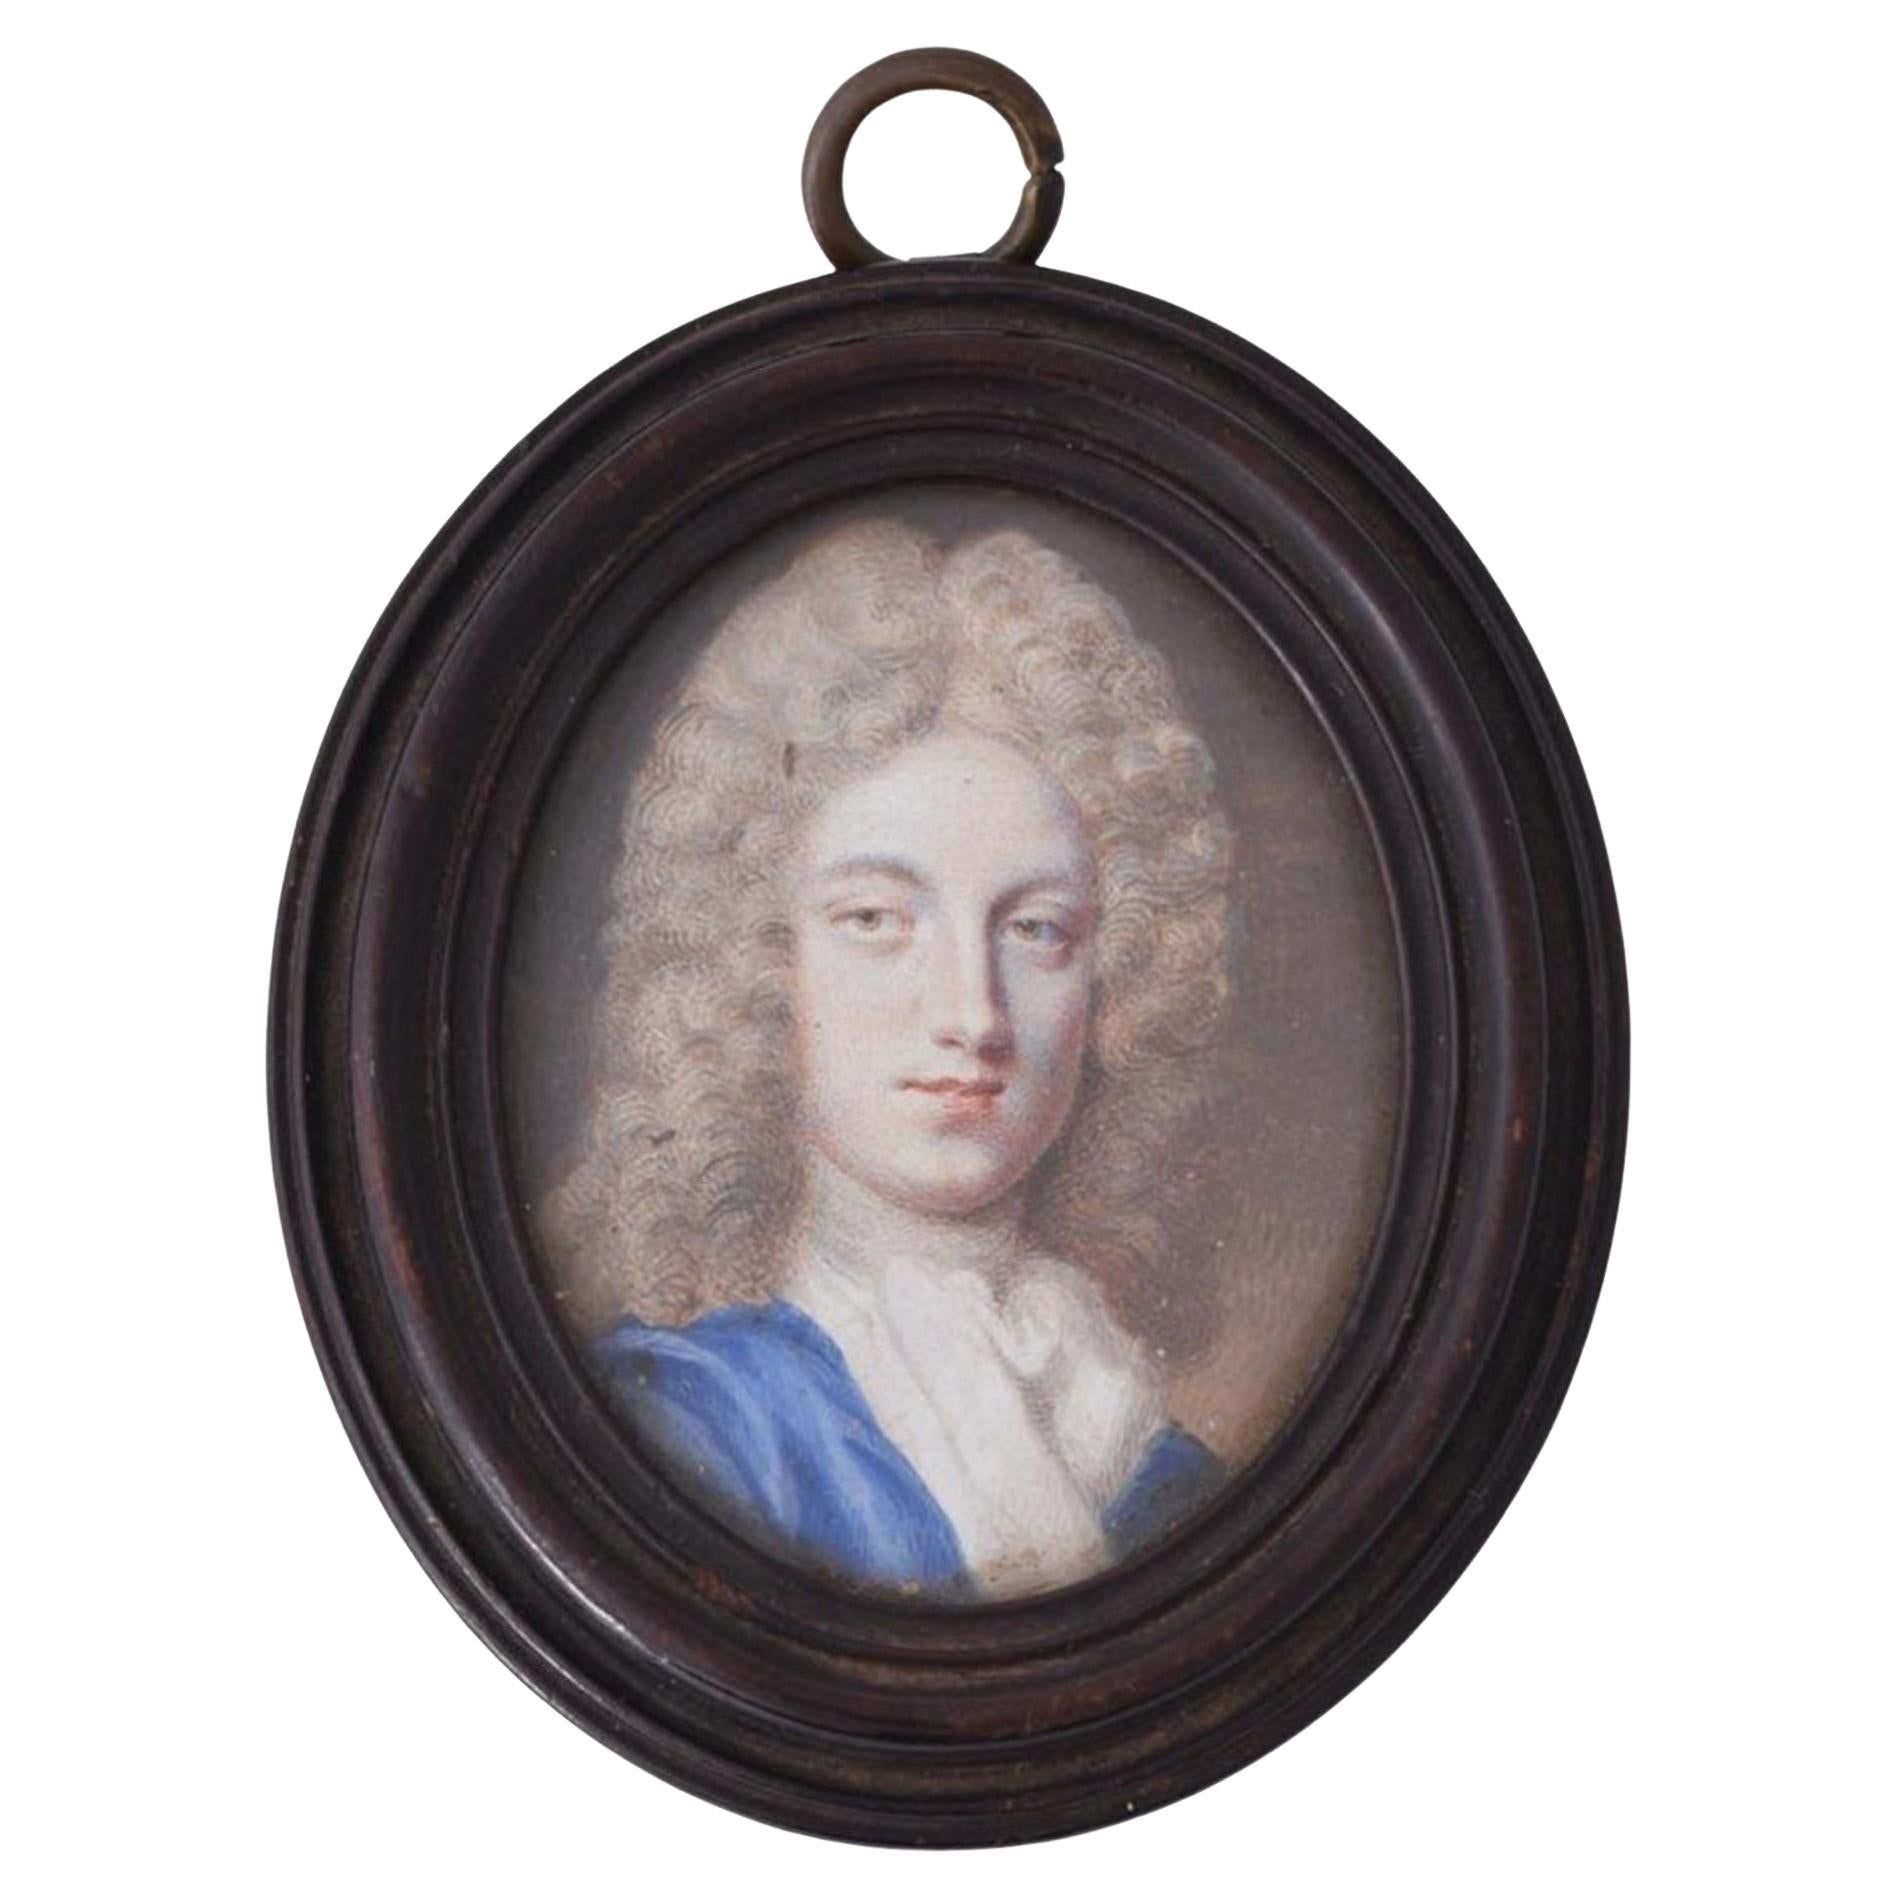 English School Early 18th Century Portrait Miniature Painting of a Gentleman